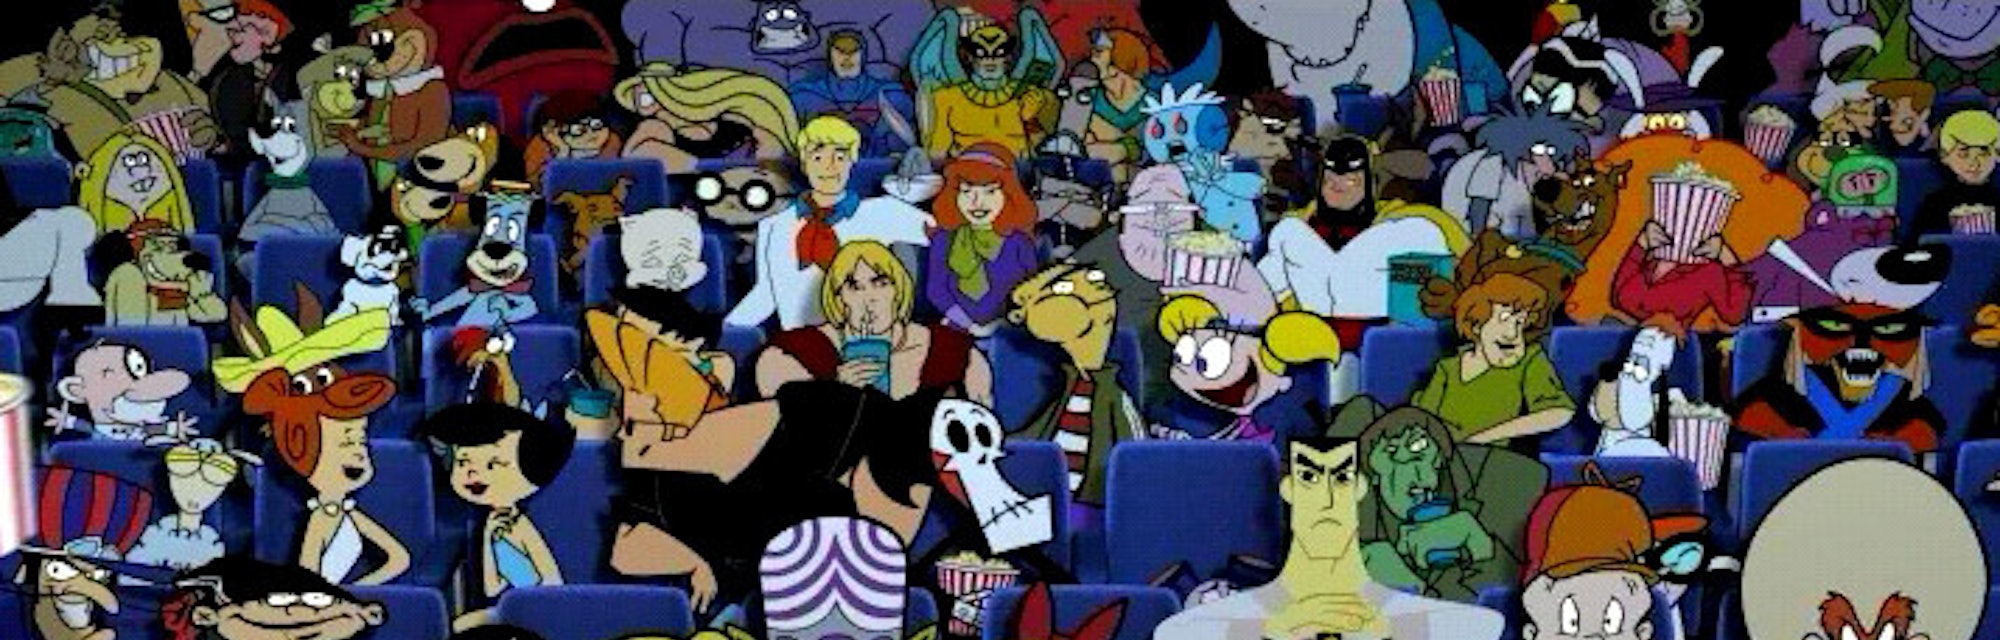 Cartoon network characters sitting together in a movie theater.